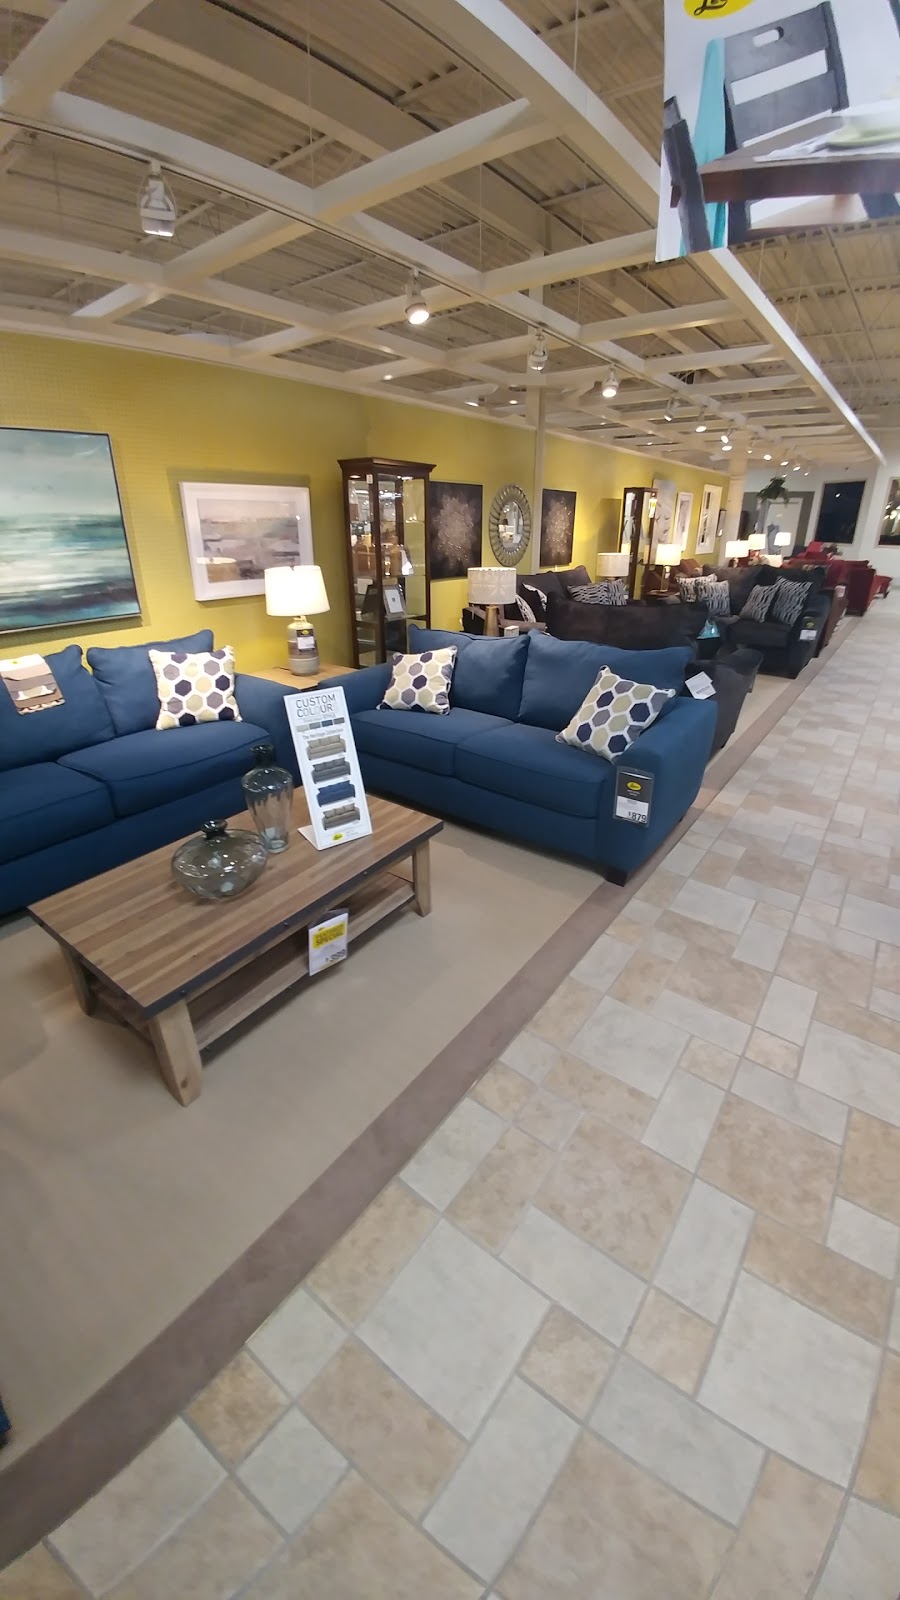 Leons Furniture | electronics store | 10 Suntract Rd, North York, ON M9N 3N9, Canada | 4162438300 OR +1 416-243-8300